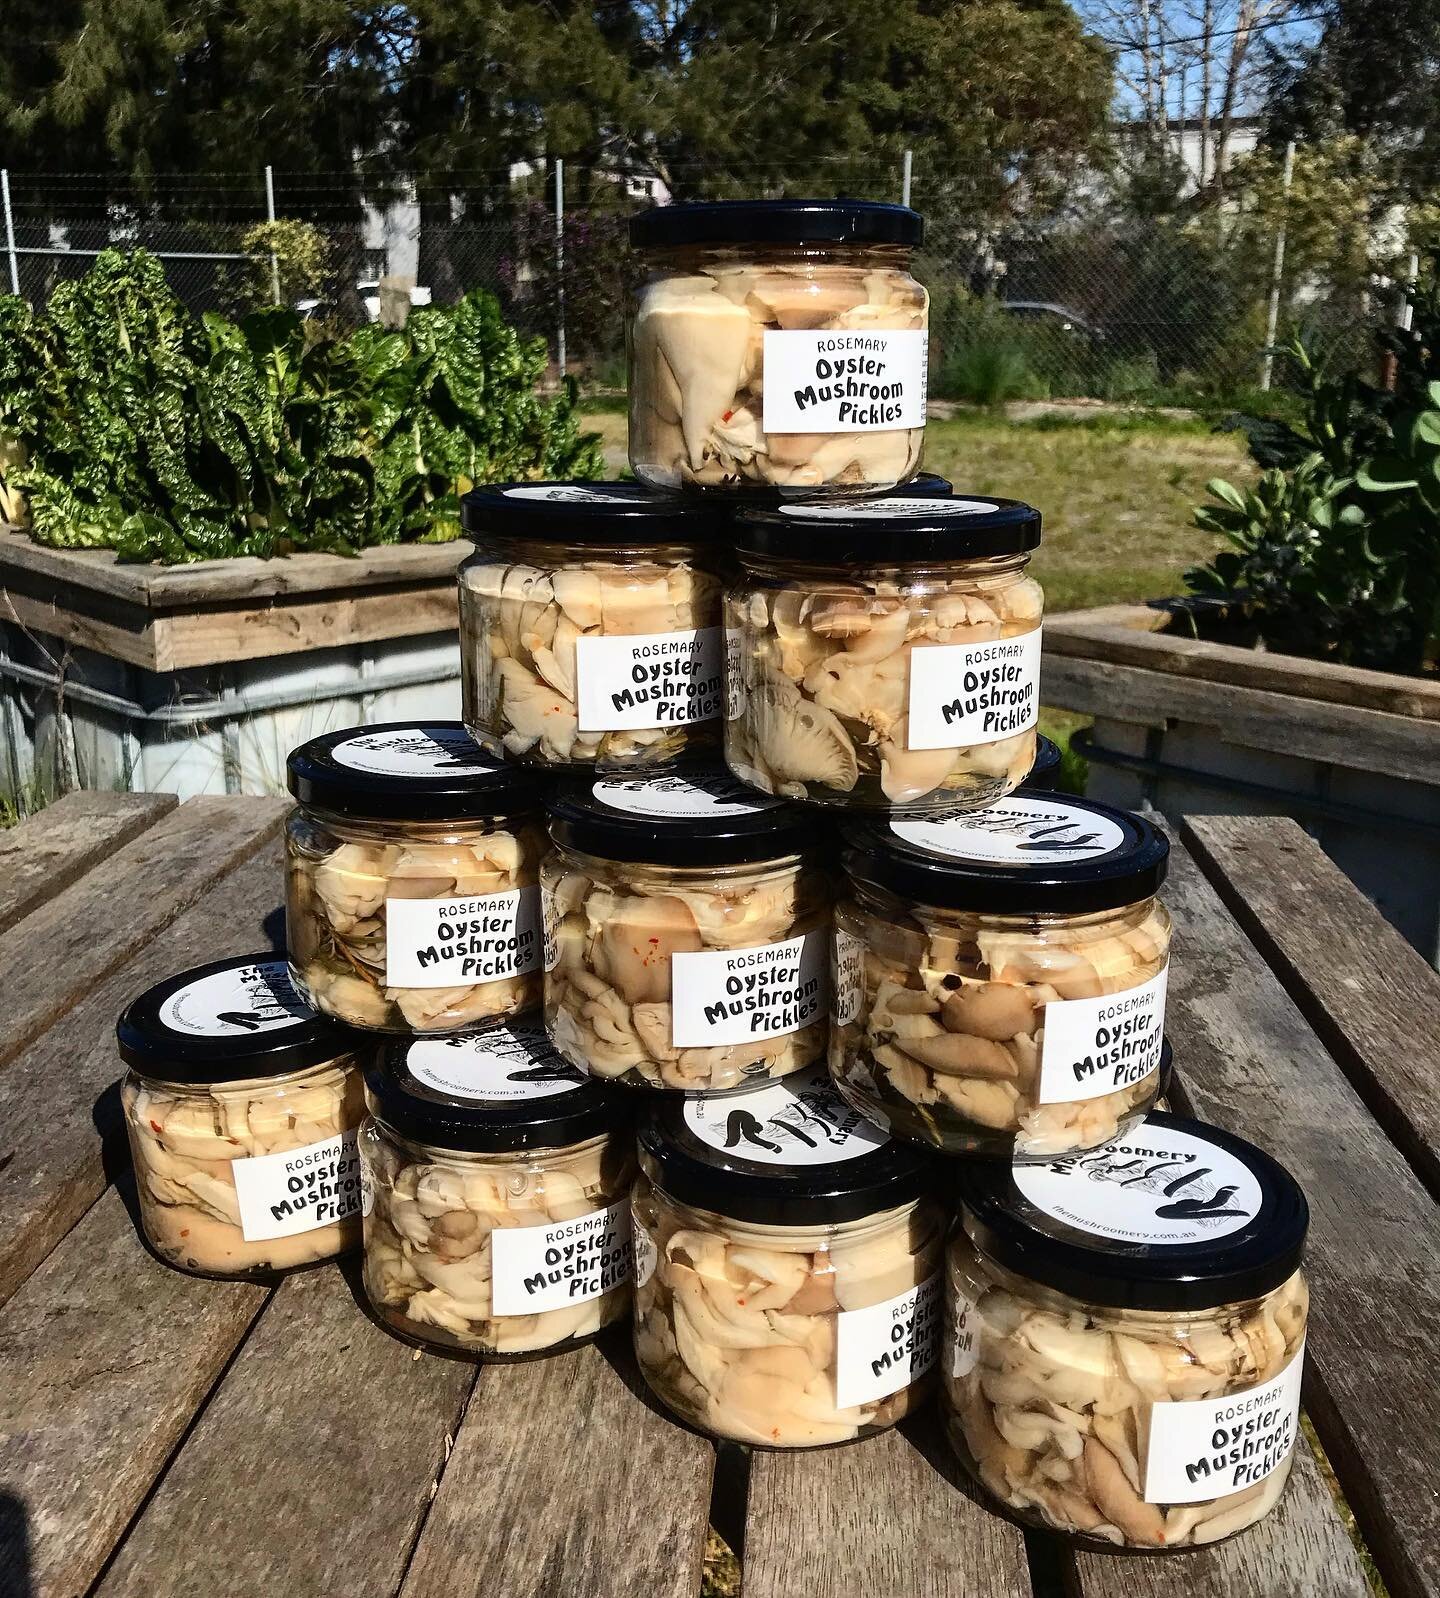 Have you noticed we have pickles now! These Rosemary Pickled Mushrooms are delicious on toast with cream cheese or straight out of the jar on a board of charcuterie! #pickledmushrooms @themushroomery